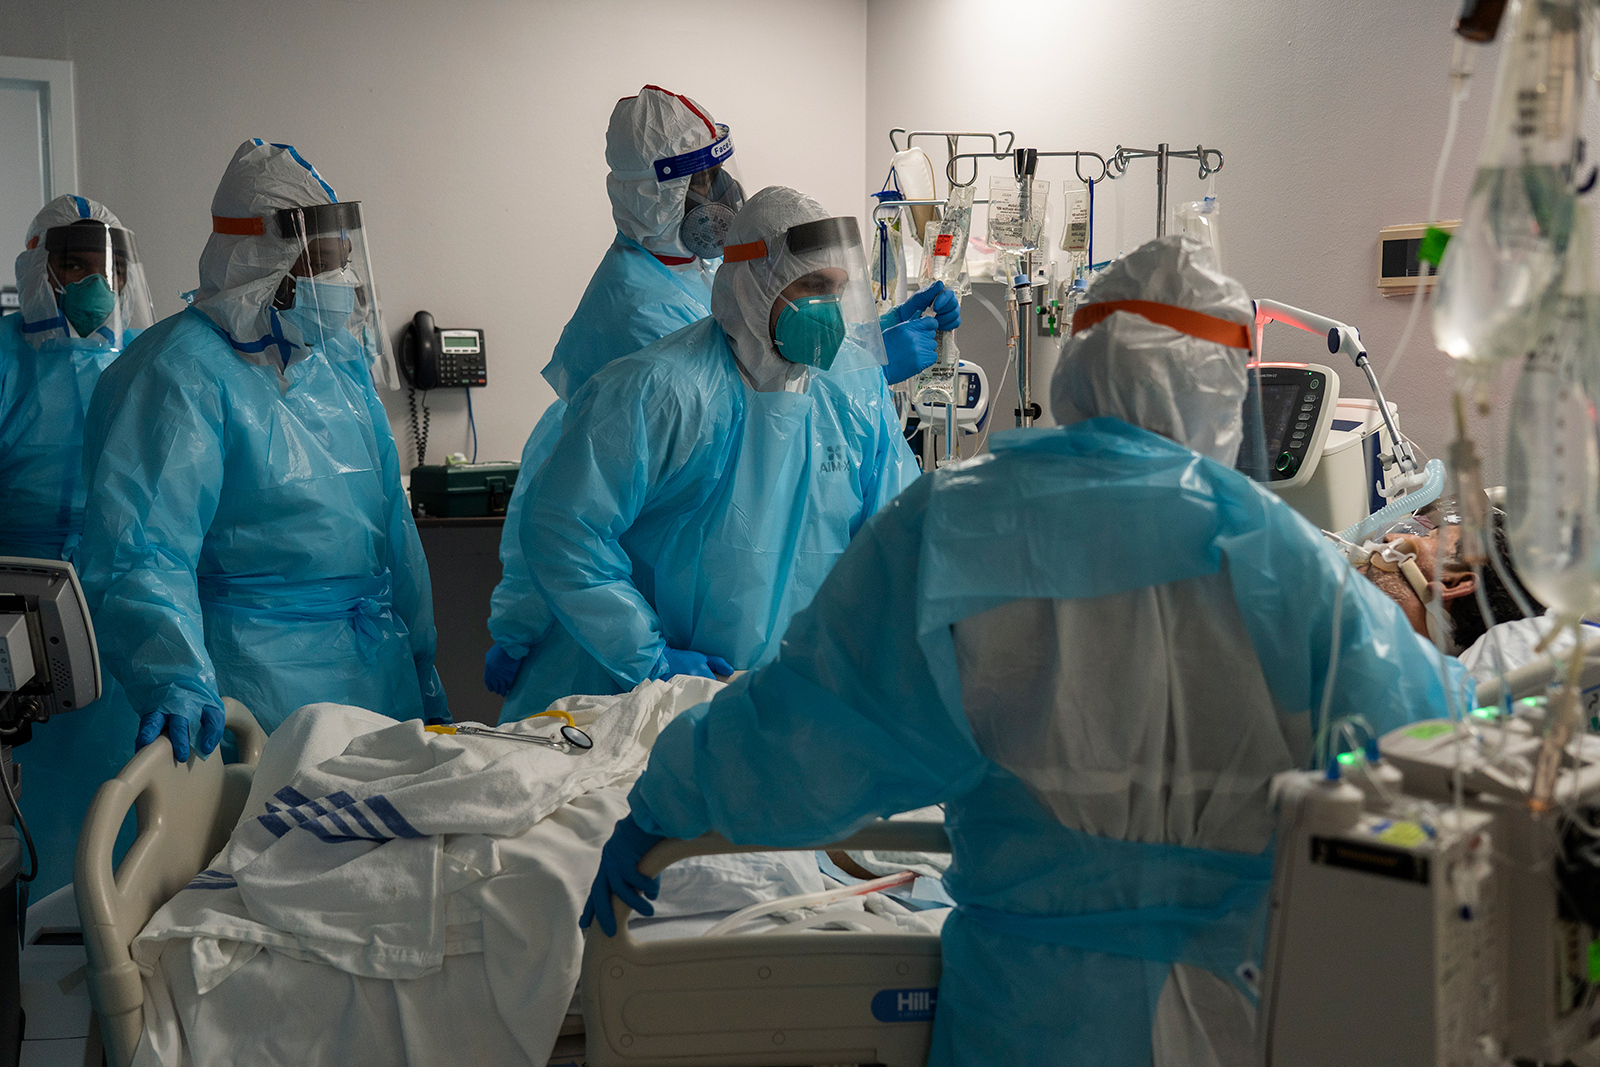 Medical staff members treat a patient in the Covid-19 intensive care unit at the United Memorial Medical Center on December 22, in Houston.